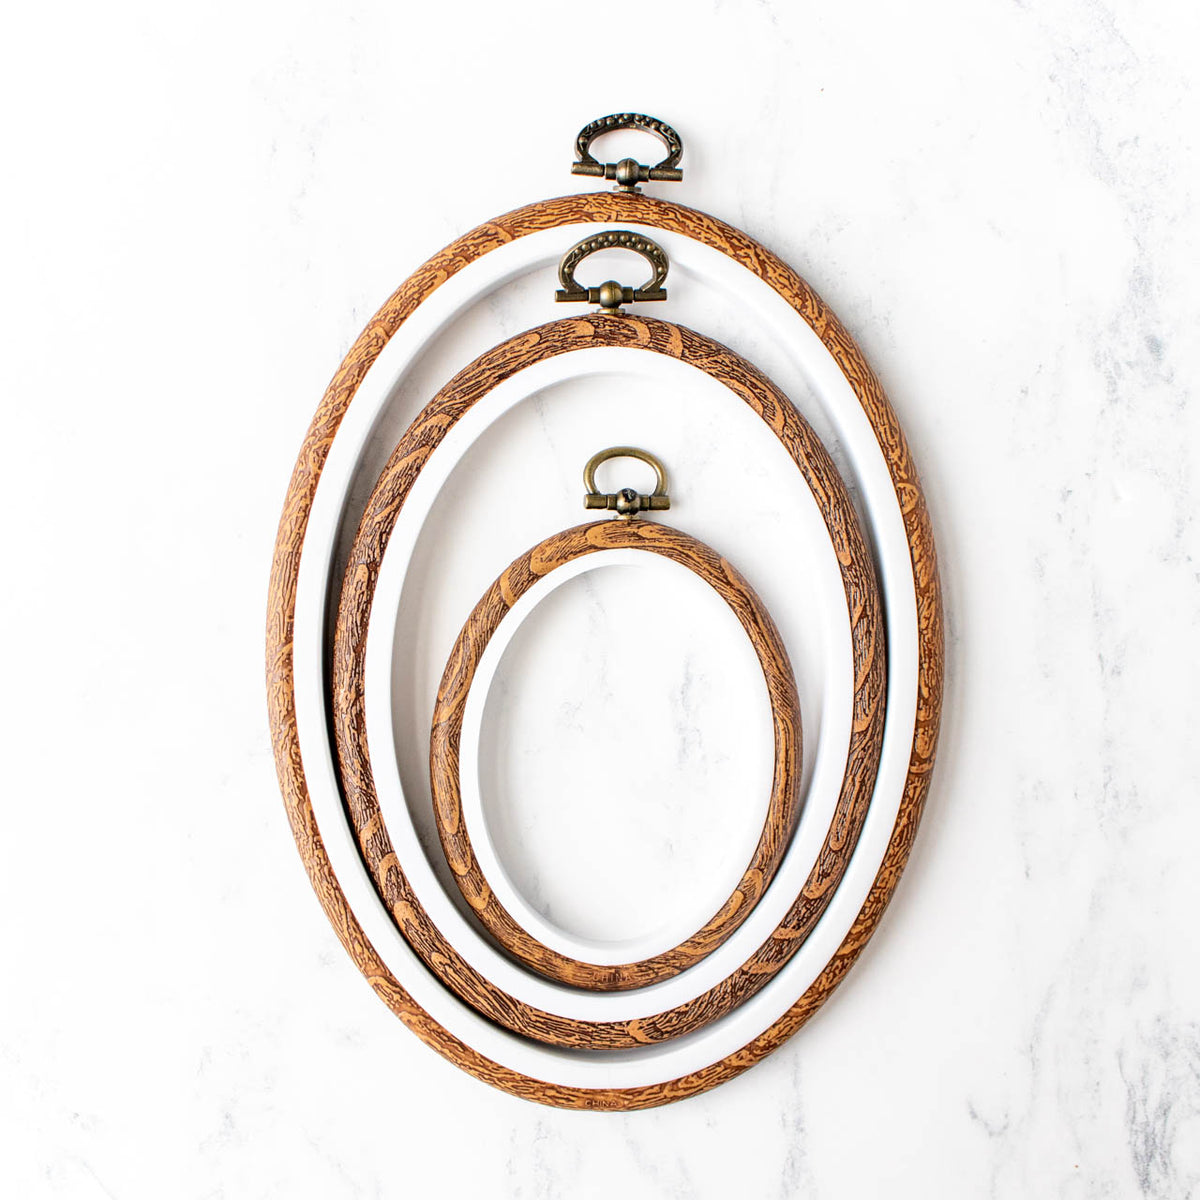 Faux Wood Flexible Embroidery Hoop - Oval